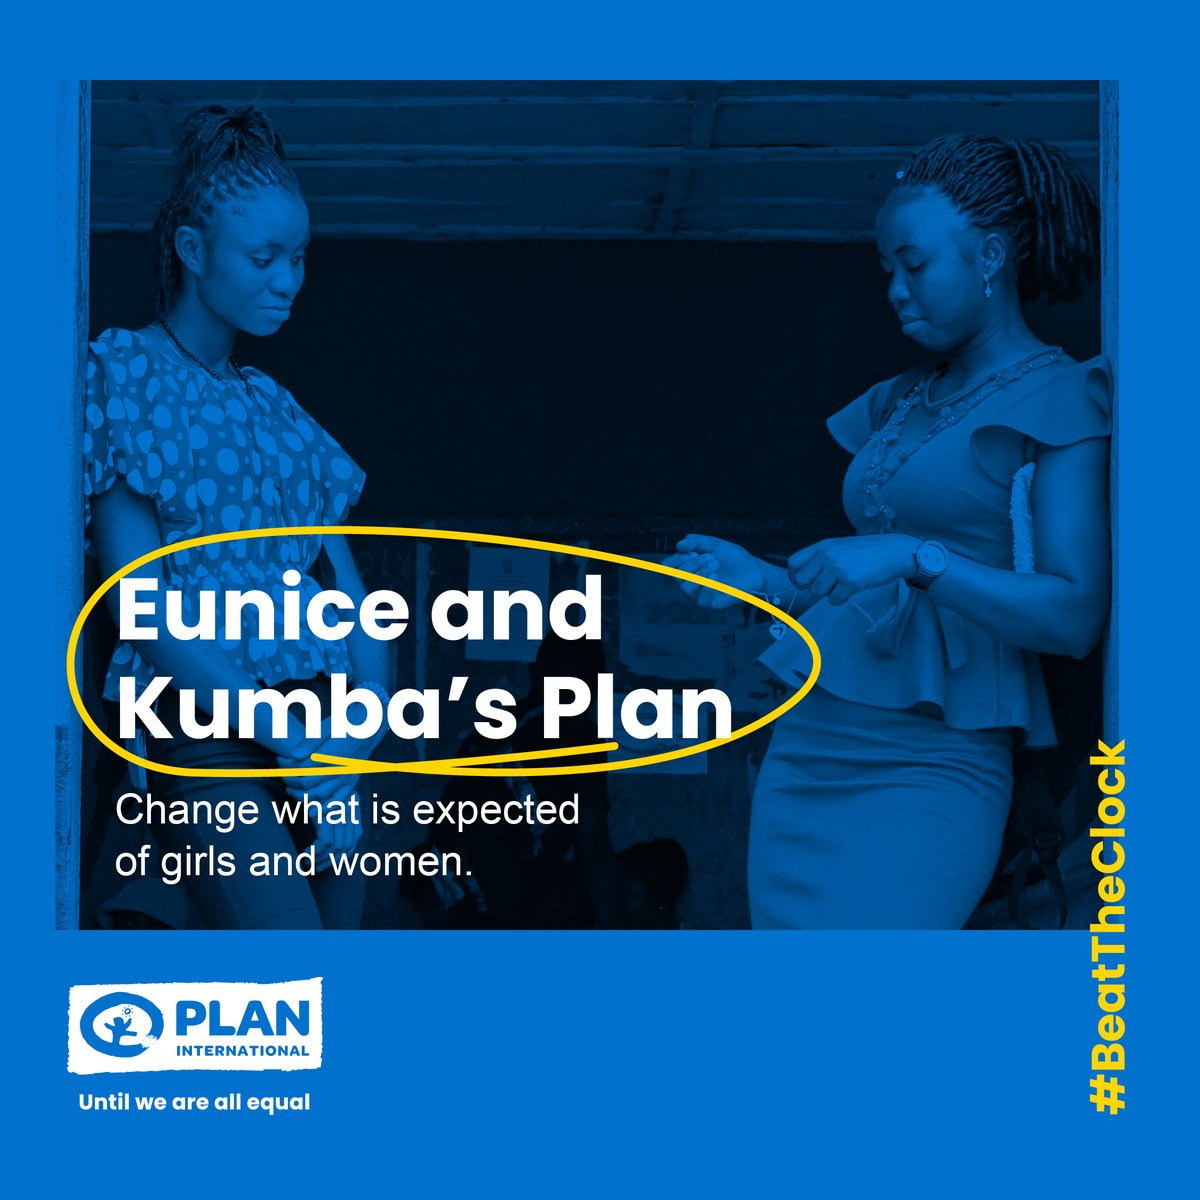 Eunice and Kumba playing their part to #BeatTheClock⏰ From being drop outs, these two are now teachers changing the narratives in their community. Click the link [shorturl.at/uyLOP] to read the full story about Eunice and Kumba's plan to #BeatTheClock #UntilWeAreAllEqual